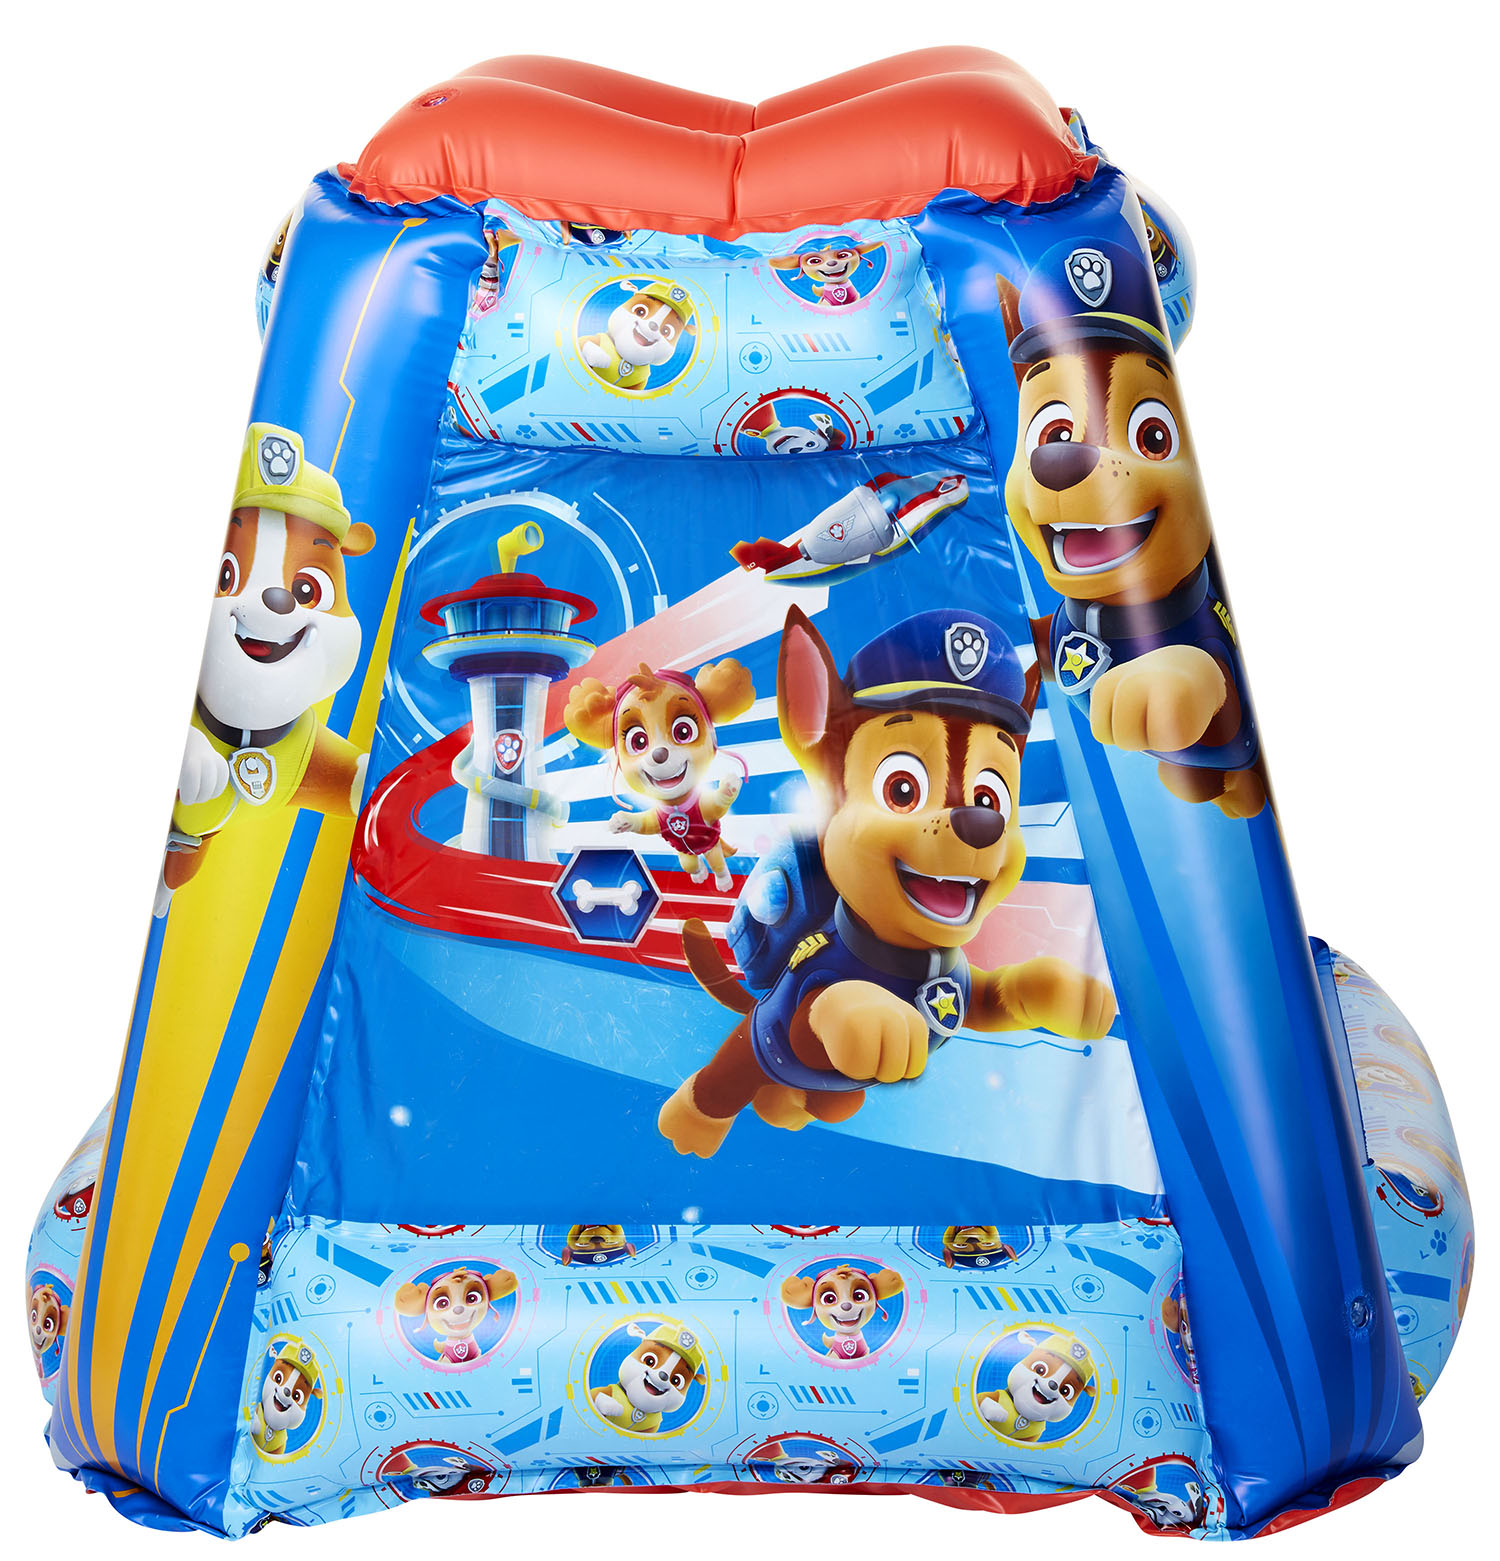 Paw Patrol Inflatable Playland Ball Pit with 20 Soft Flex Balls - image 3 of 5